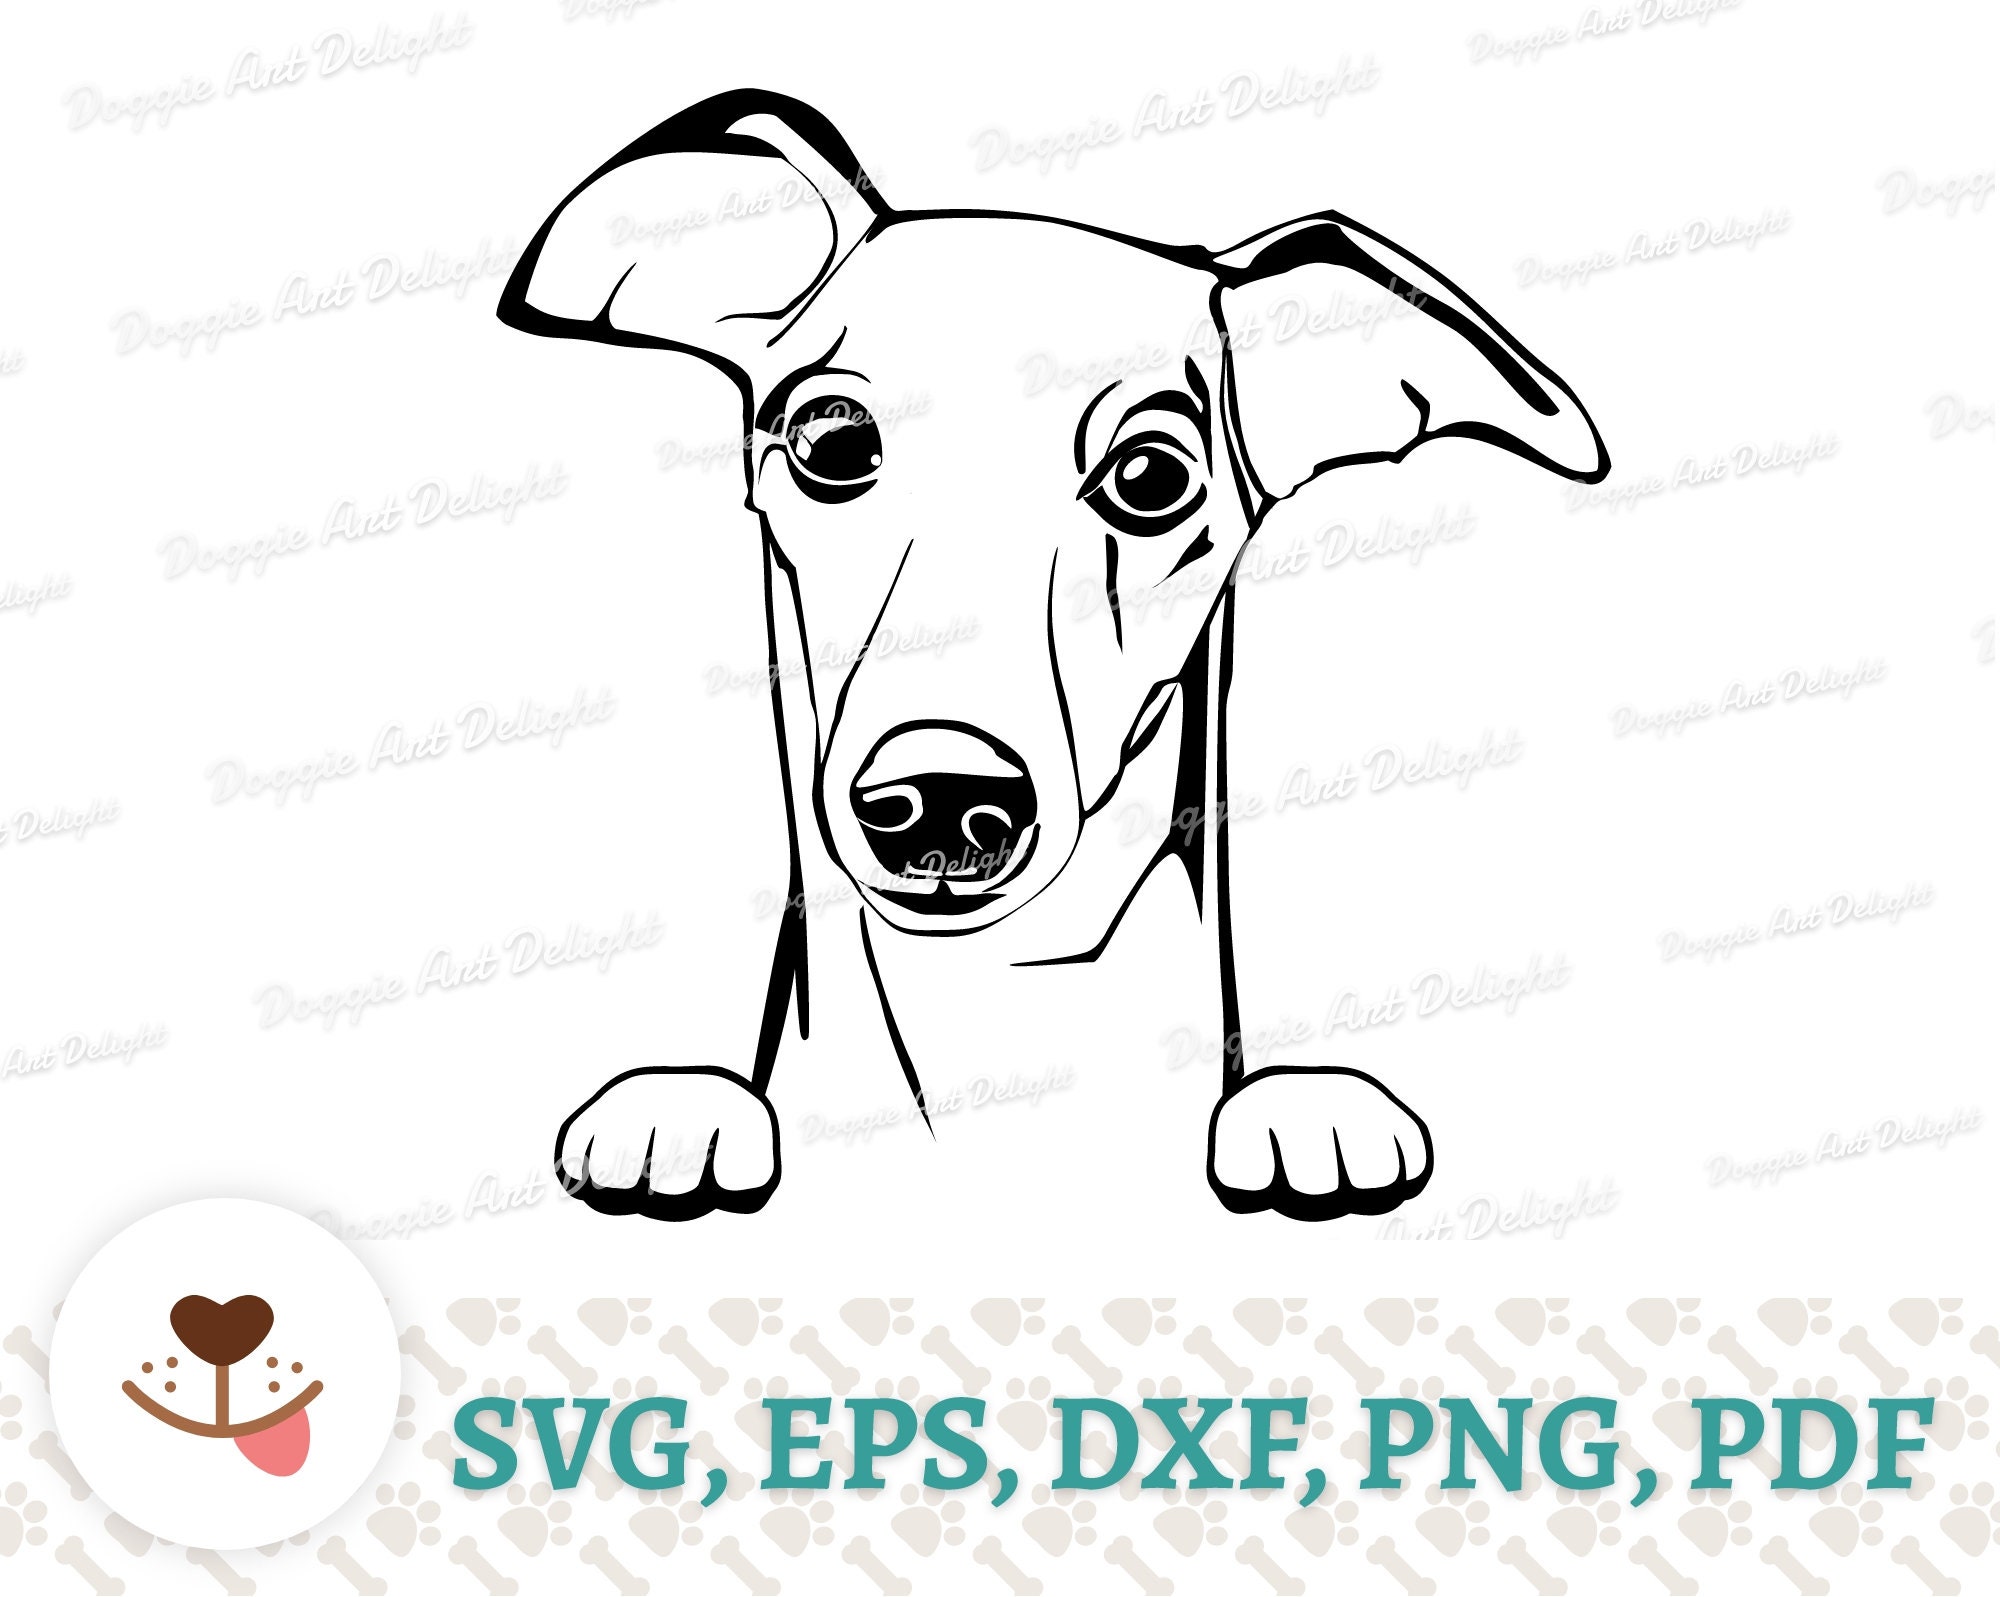 Peeking Whippet Dog Svg Vector Art Cute Whippet With Paws | Etsy